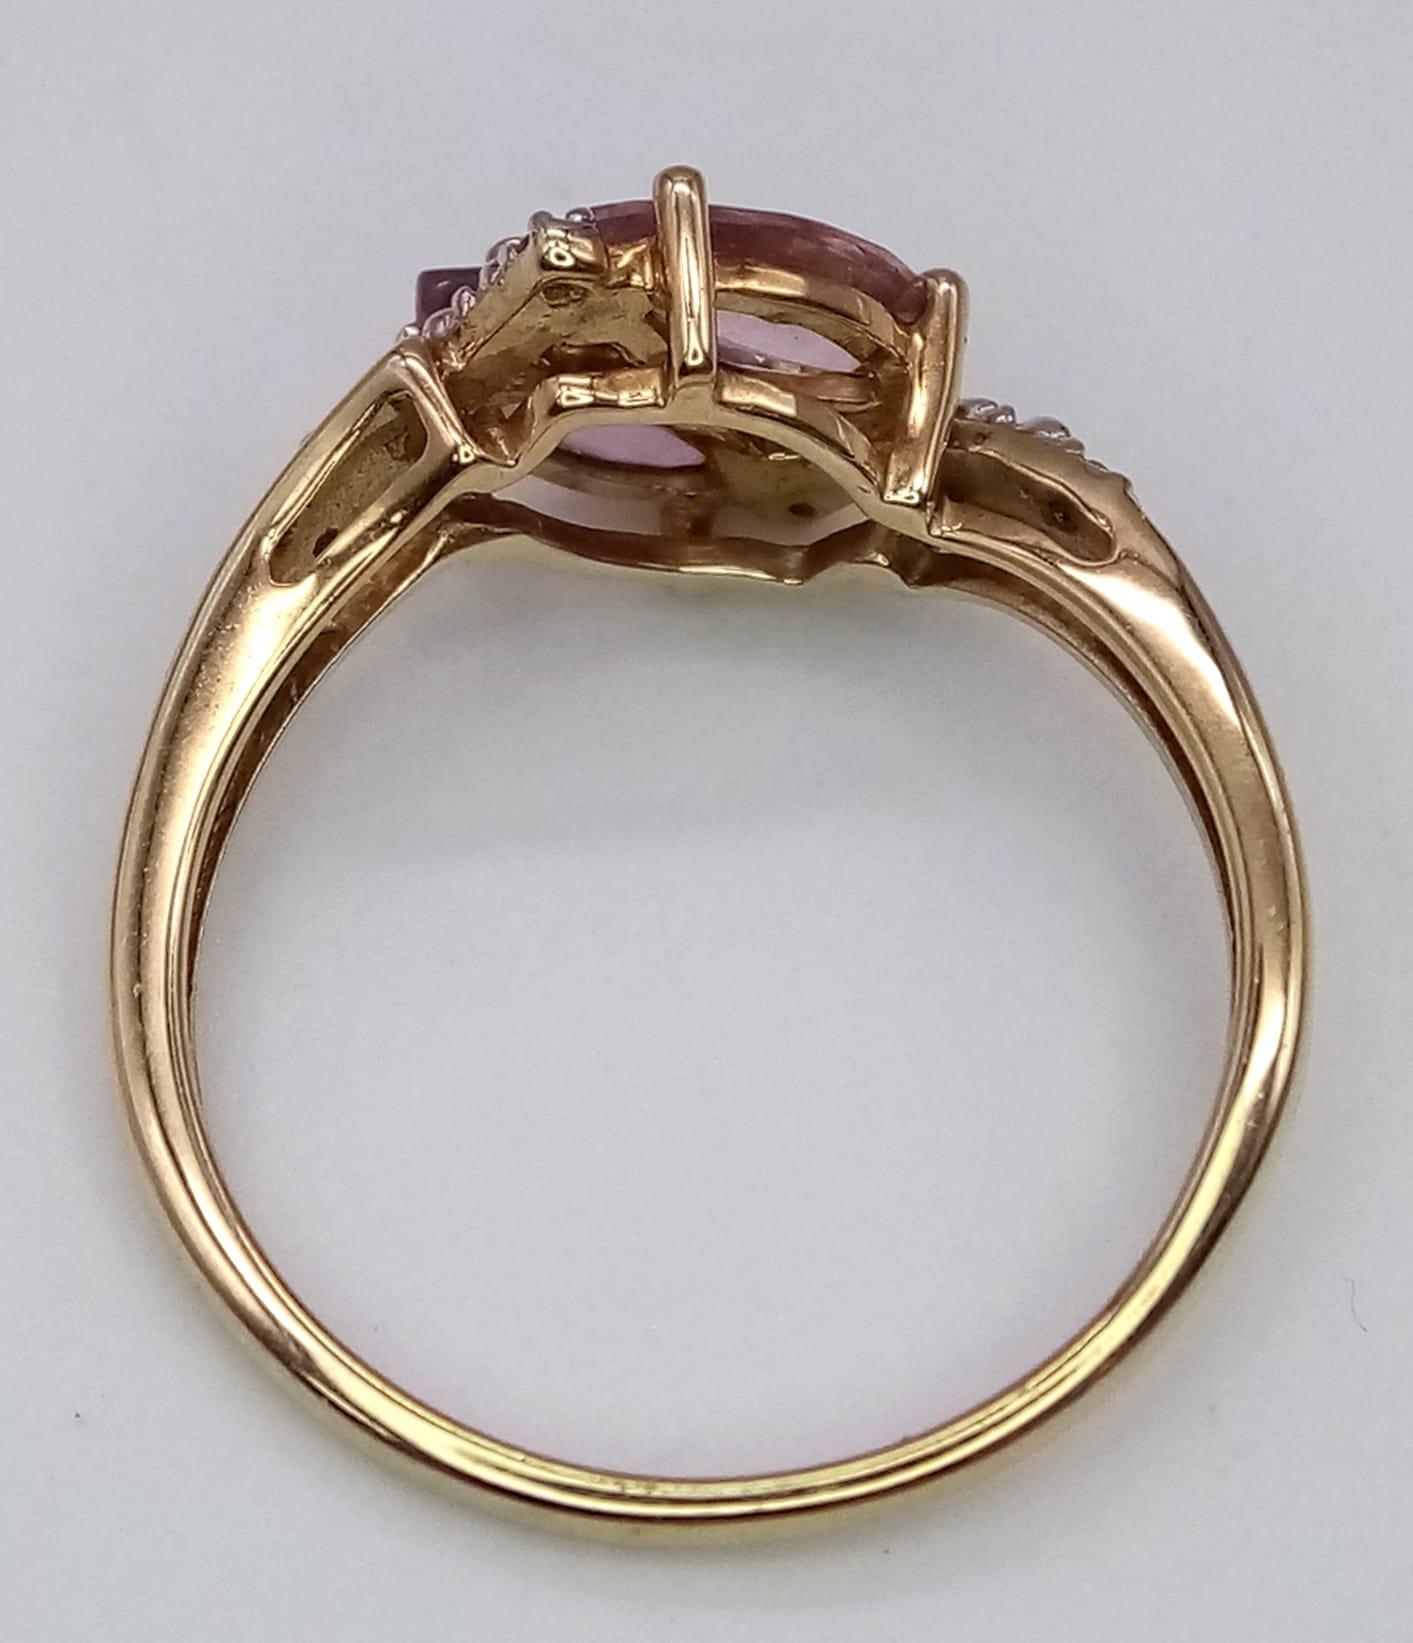 A 10k Yellow Gold, Amethyst and Diamond Crossover Ring. Size N. 2.17g total weight. - Image 3 of 4